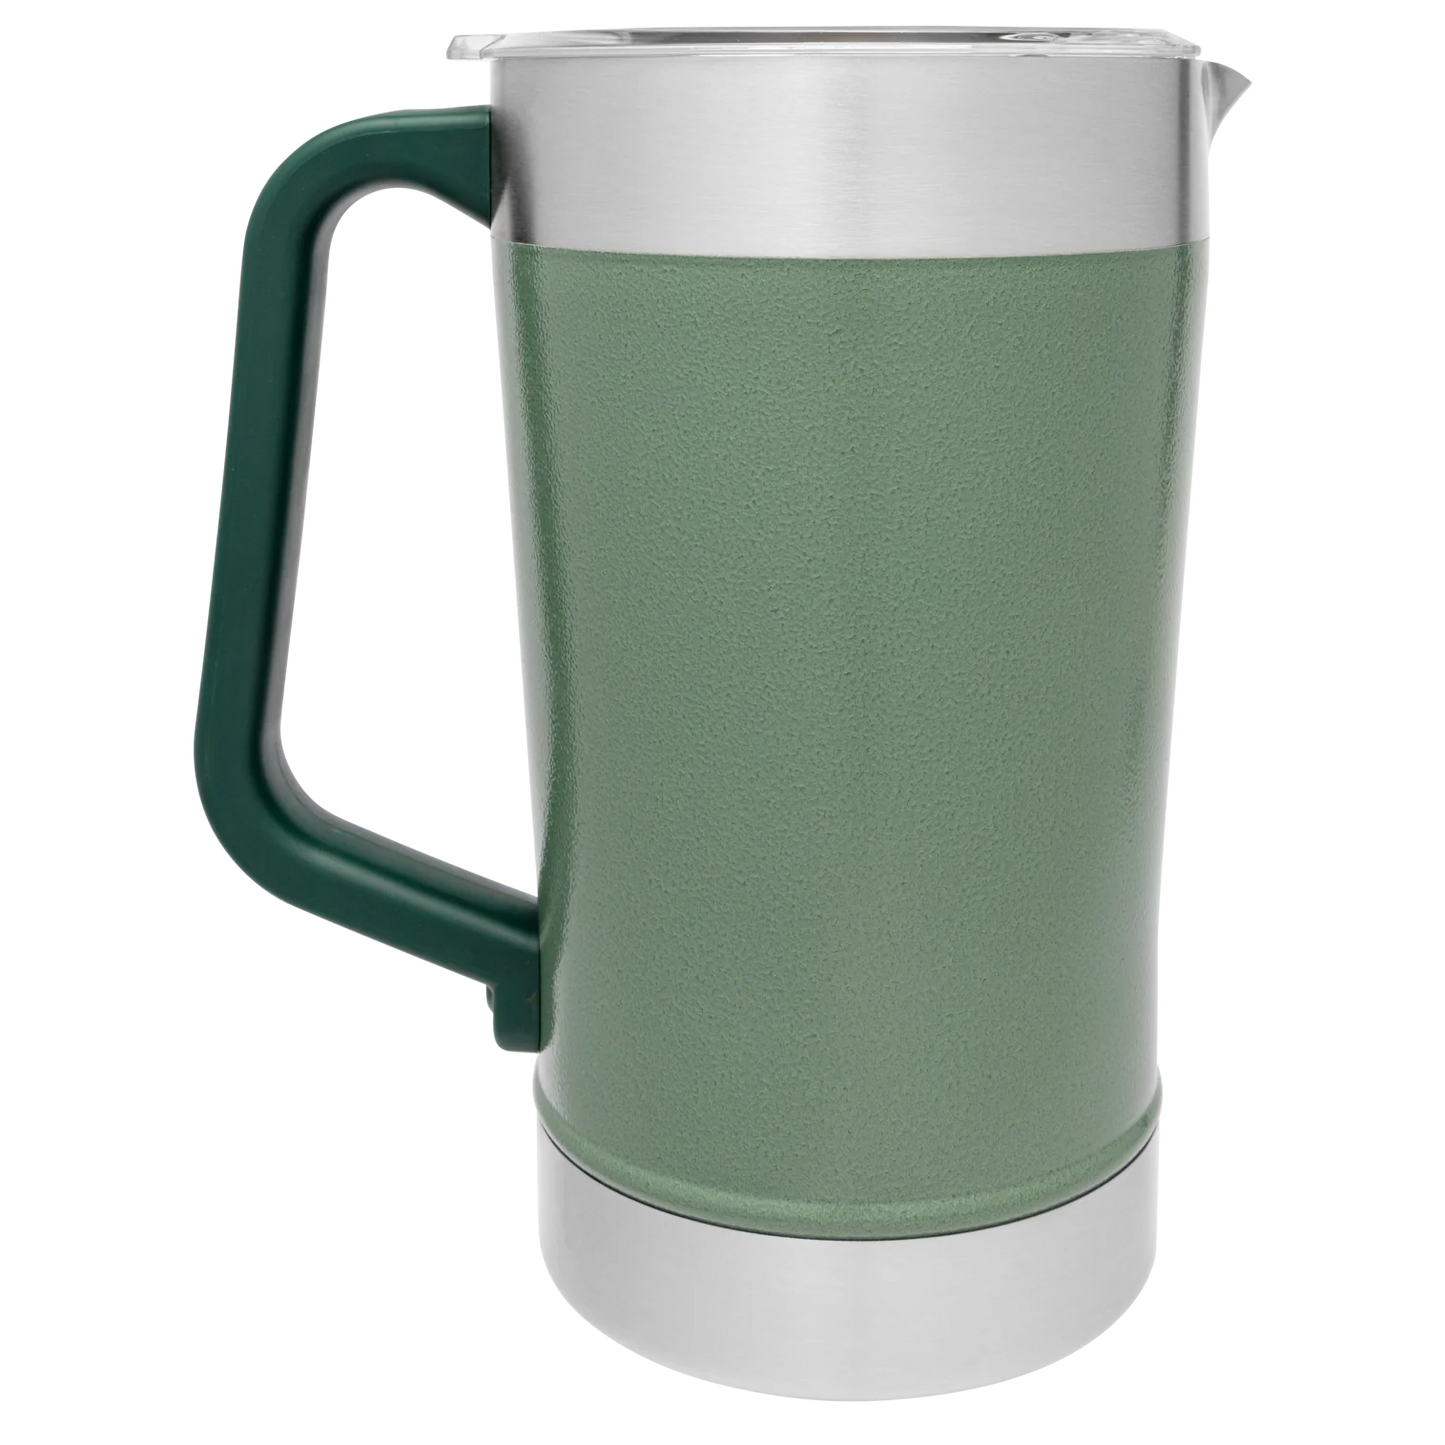 Stanley Classic Stay Chill Hammer Tone Green 64oz Pitcher 10-10341-310